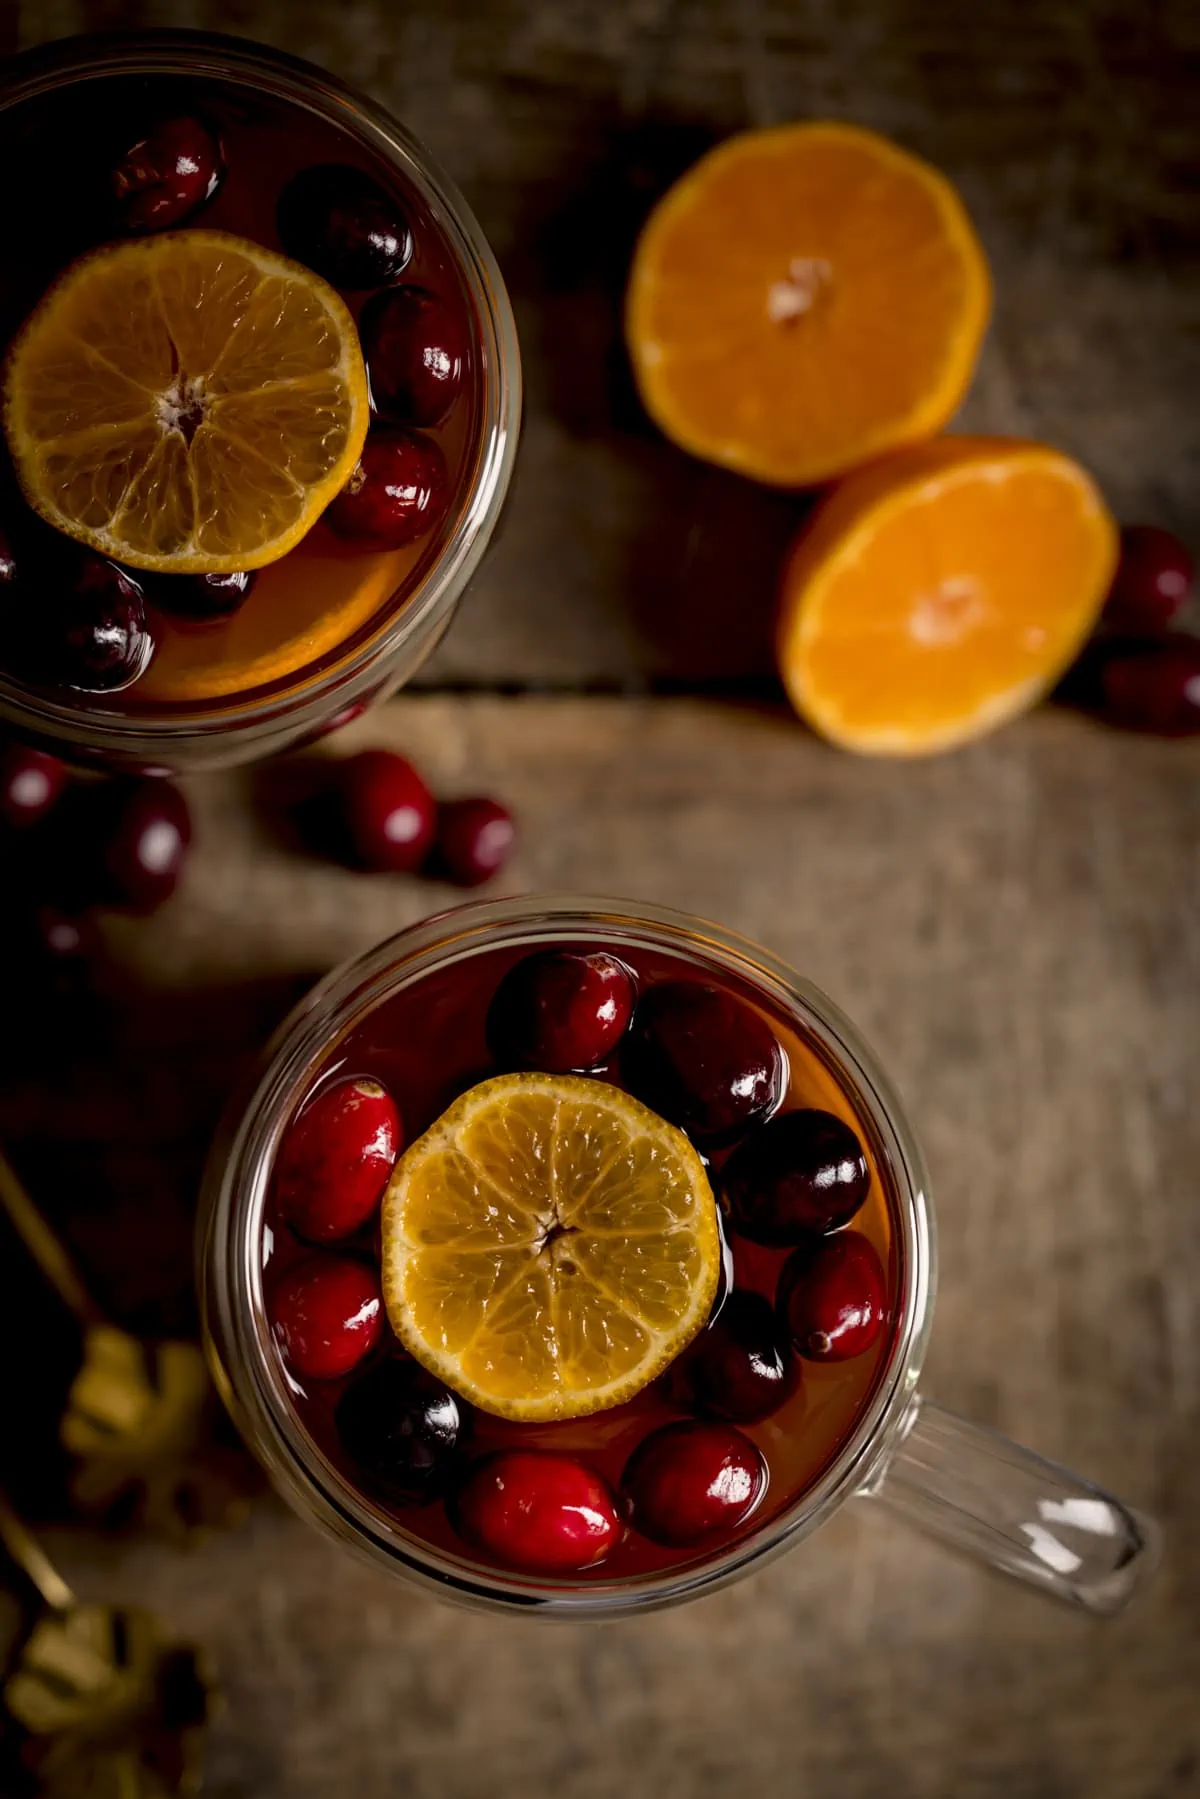 Overhead image of two glass mugs filled with mulled cider, cranberries and clementine slices on a wooden table. There is a clementine sliced in half next to the mugs.